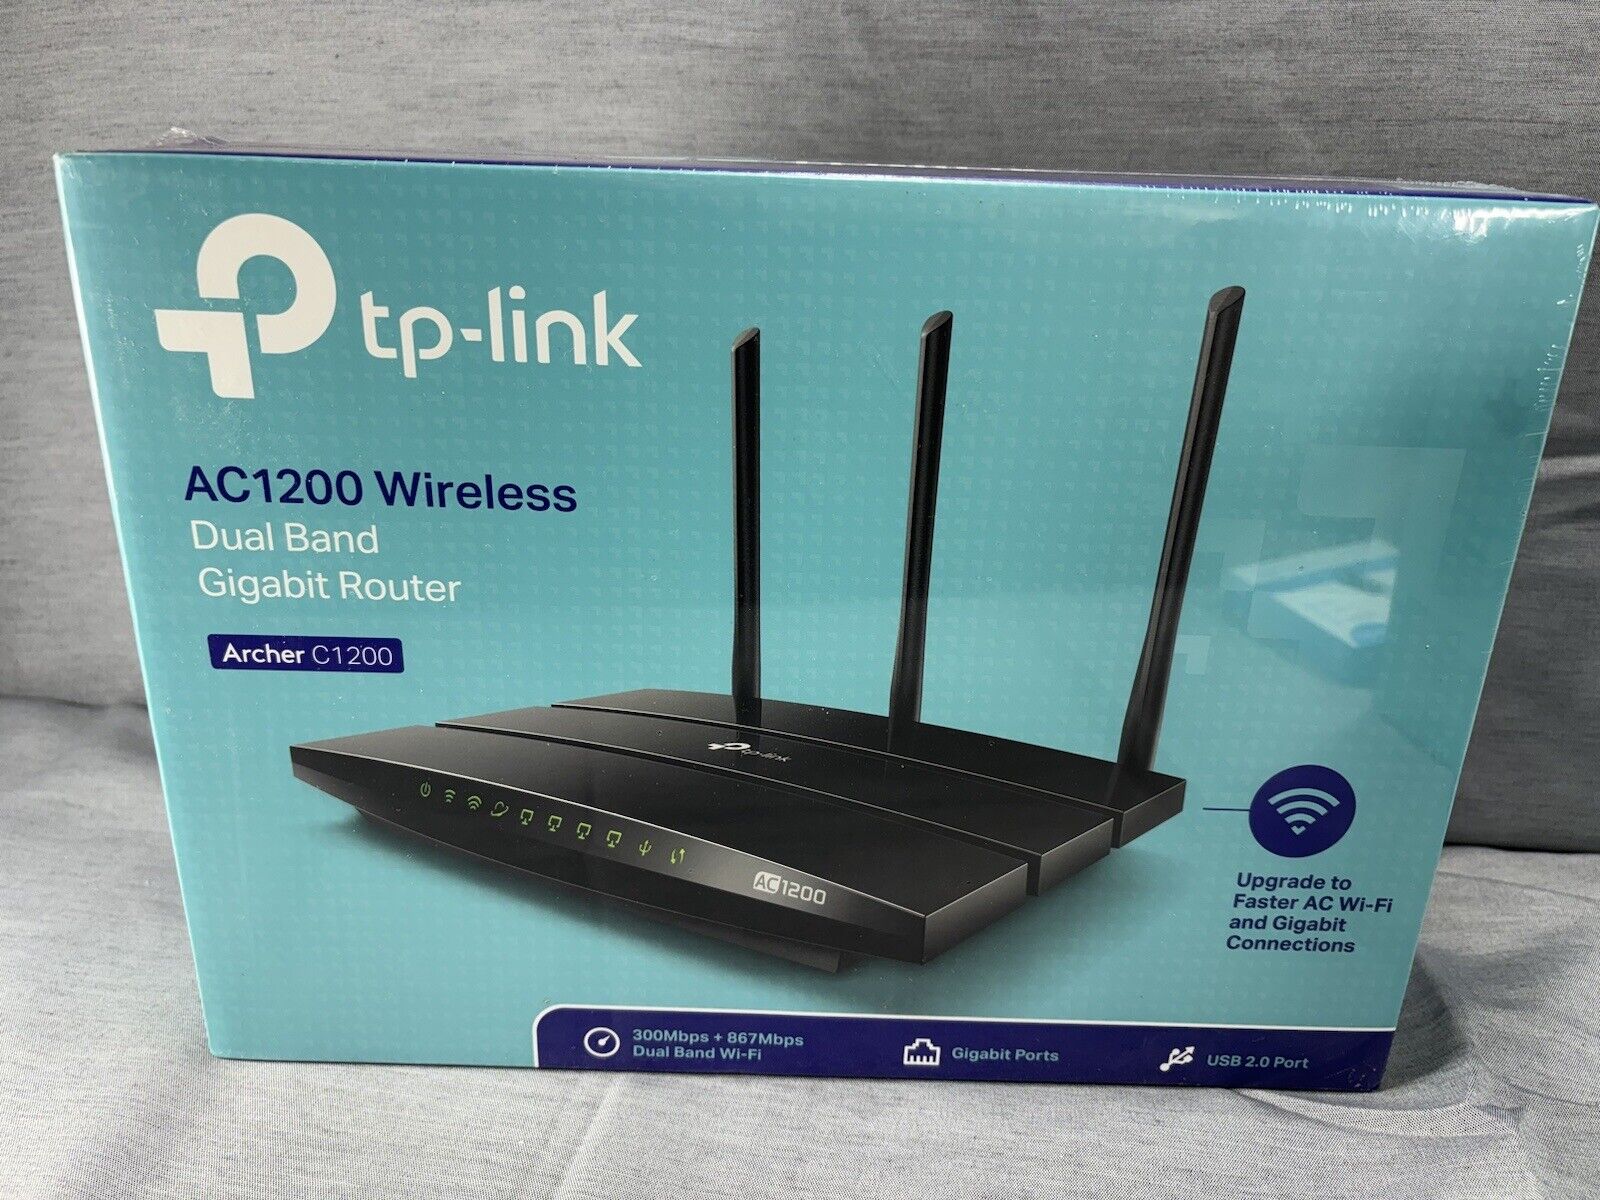 New TP-LINK AC 1200 Wireless Dual Band Gigabit Router Archer C1200